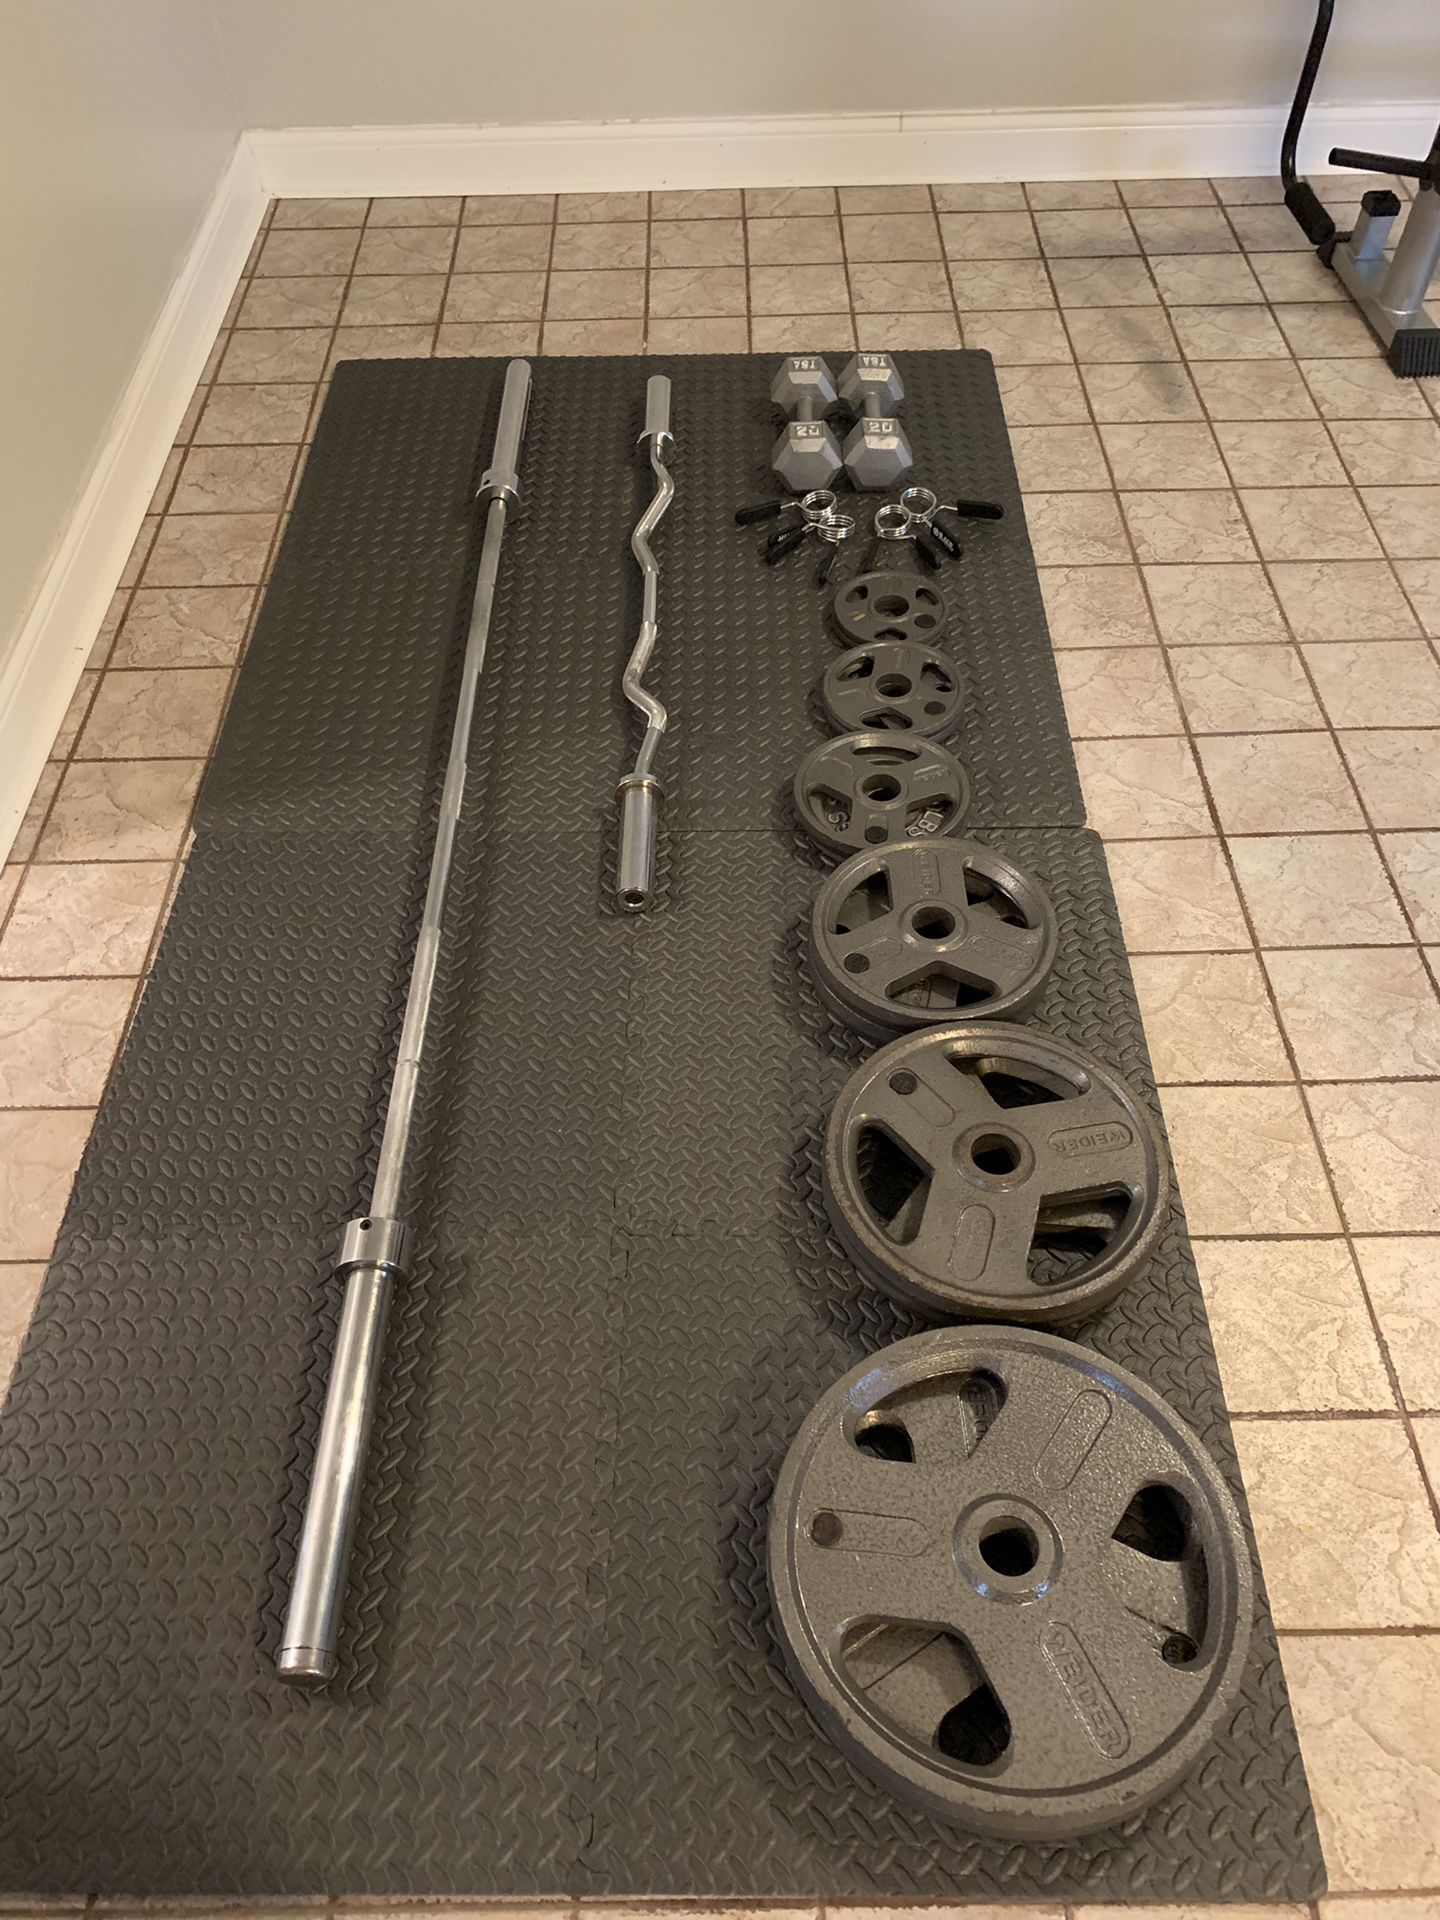 Weights and bench set